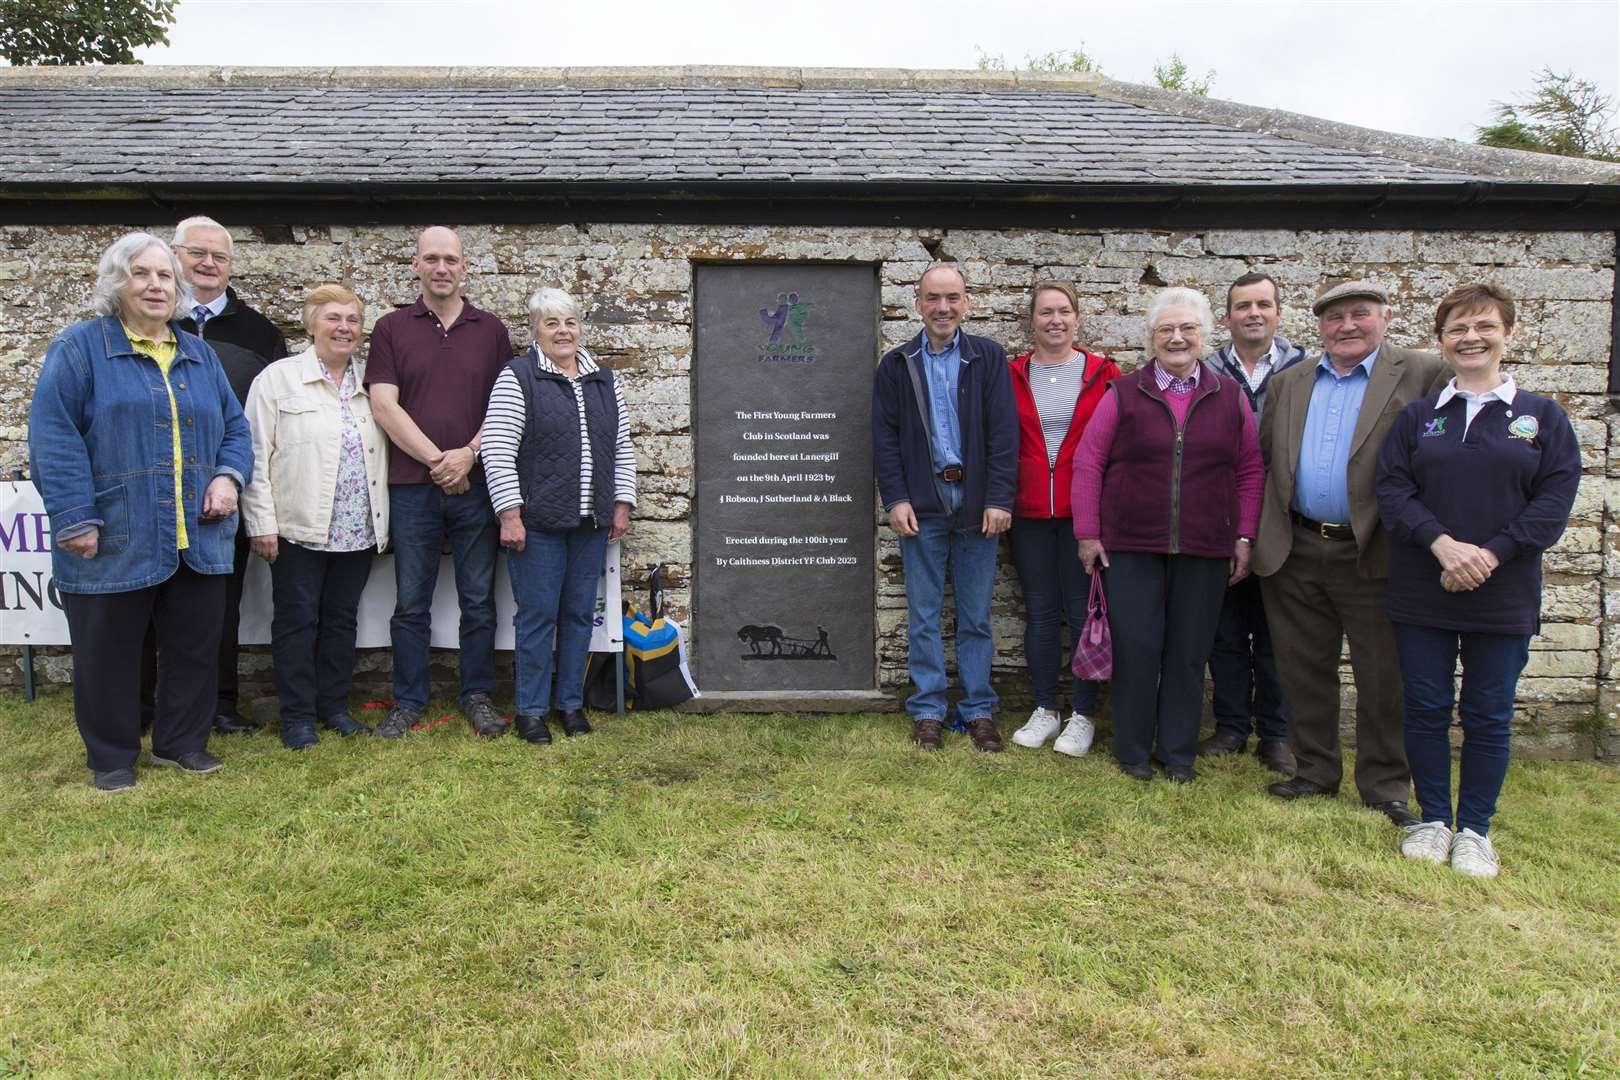 Although the Young Farmers movement came into being in Watten district in 1923, the Watten club folded around 10 years ago due to a lack of members. Some of the past members are pictured along with the commemorative stone. Picture: Robert MacDonald / Northern Studios